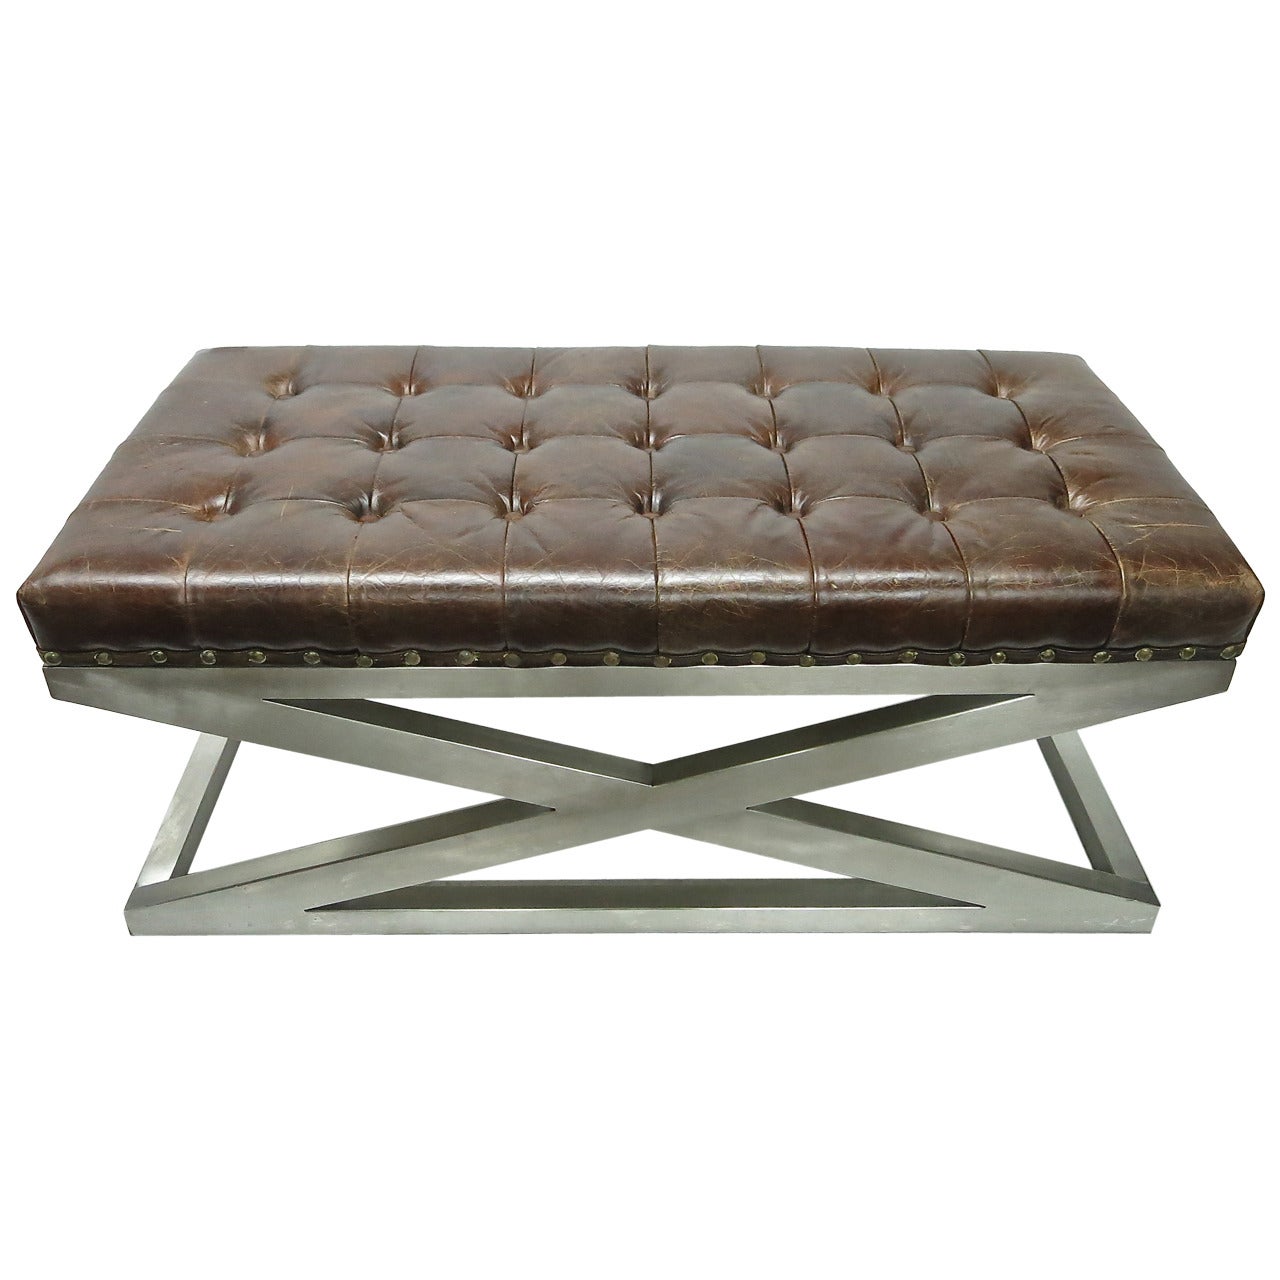 Bench in Brushed Steel and Tufted Leather, Made in France, circa 1975